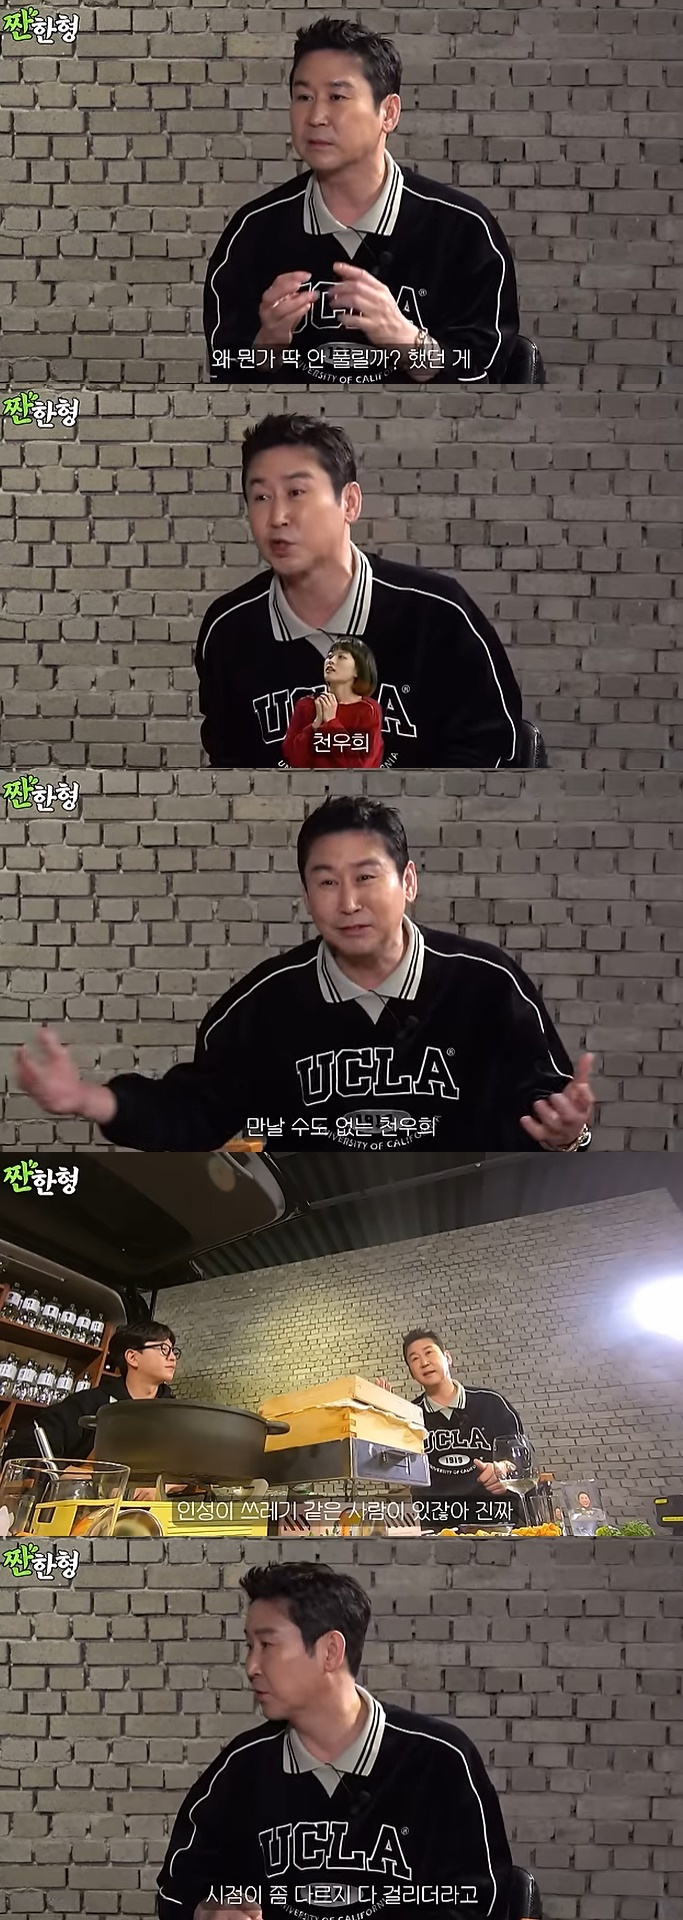 Shin DongYup’s sincere advice: Personality decides everything